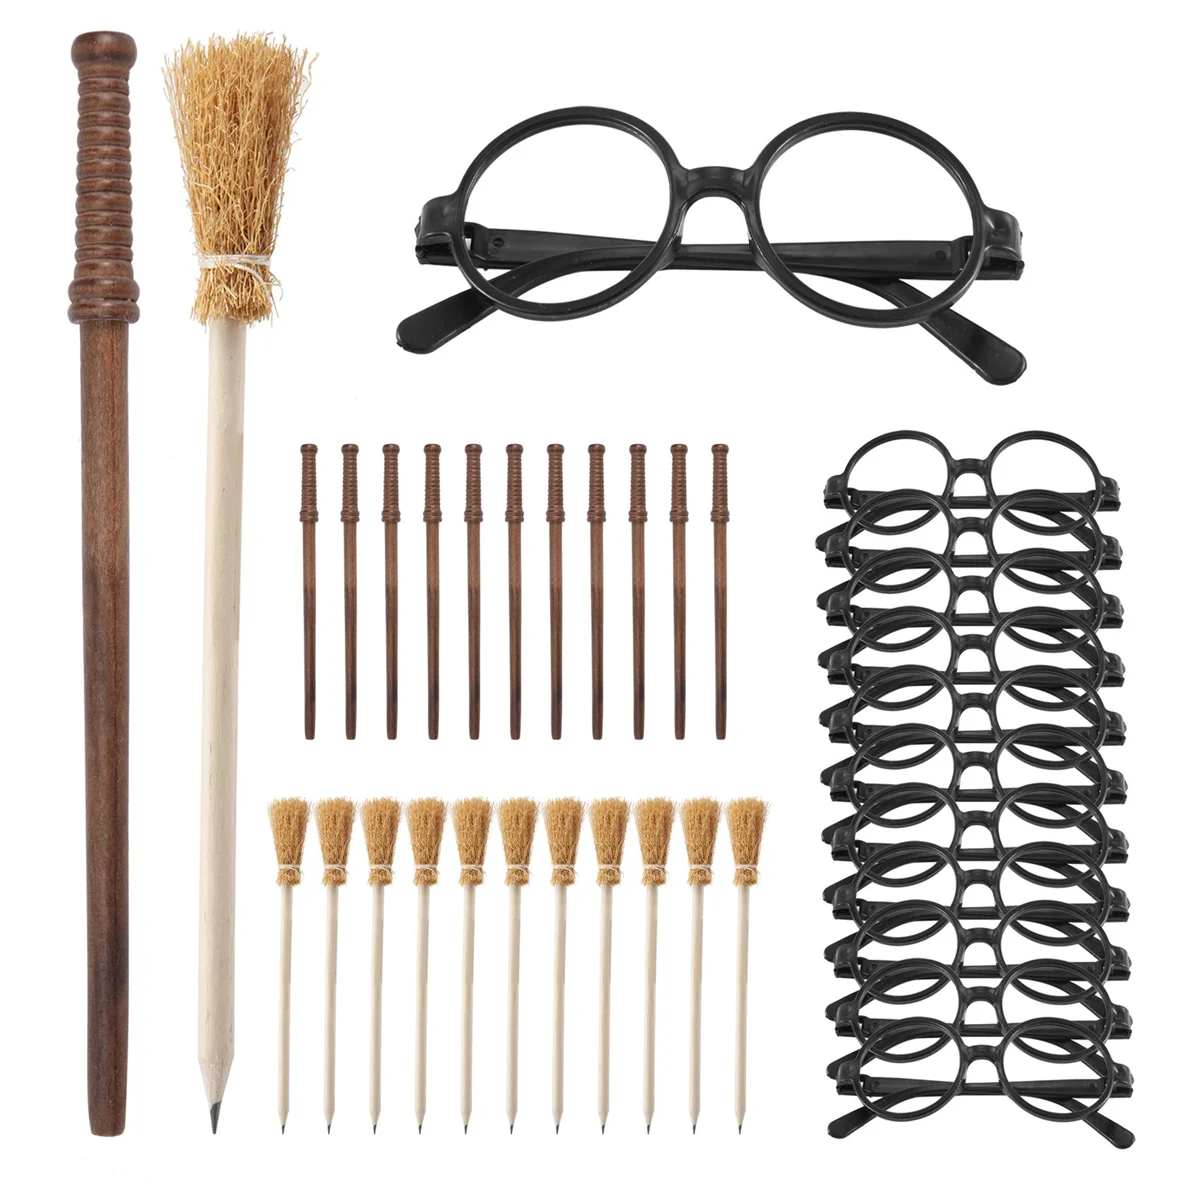 

36 Pcs Witch Broom Pencil and Wands Pencils and Glasses with Round Frame No Lenses,Wizard Wands Theme Party Supplies